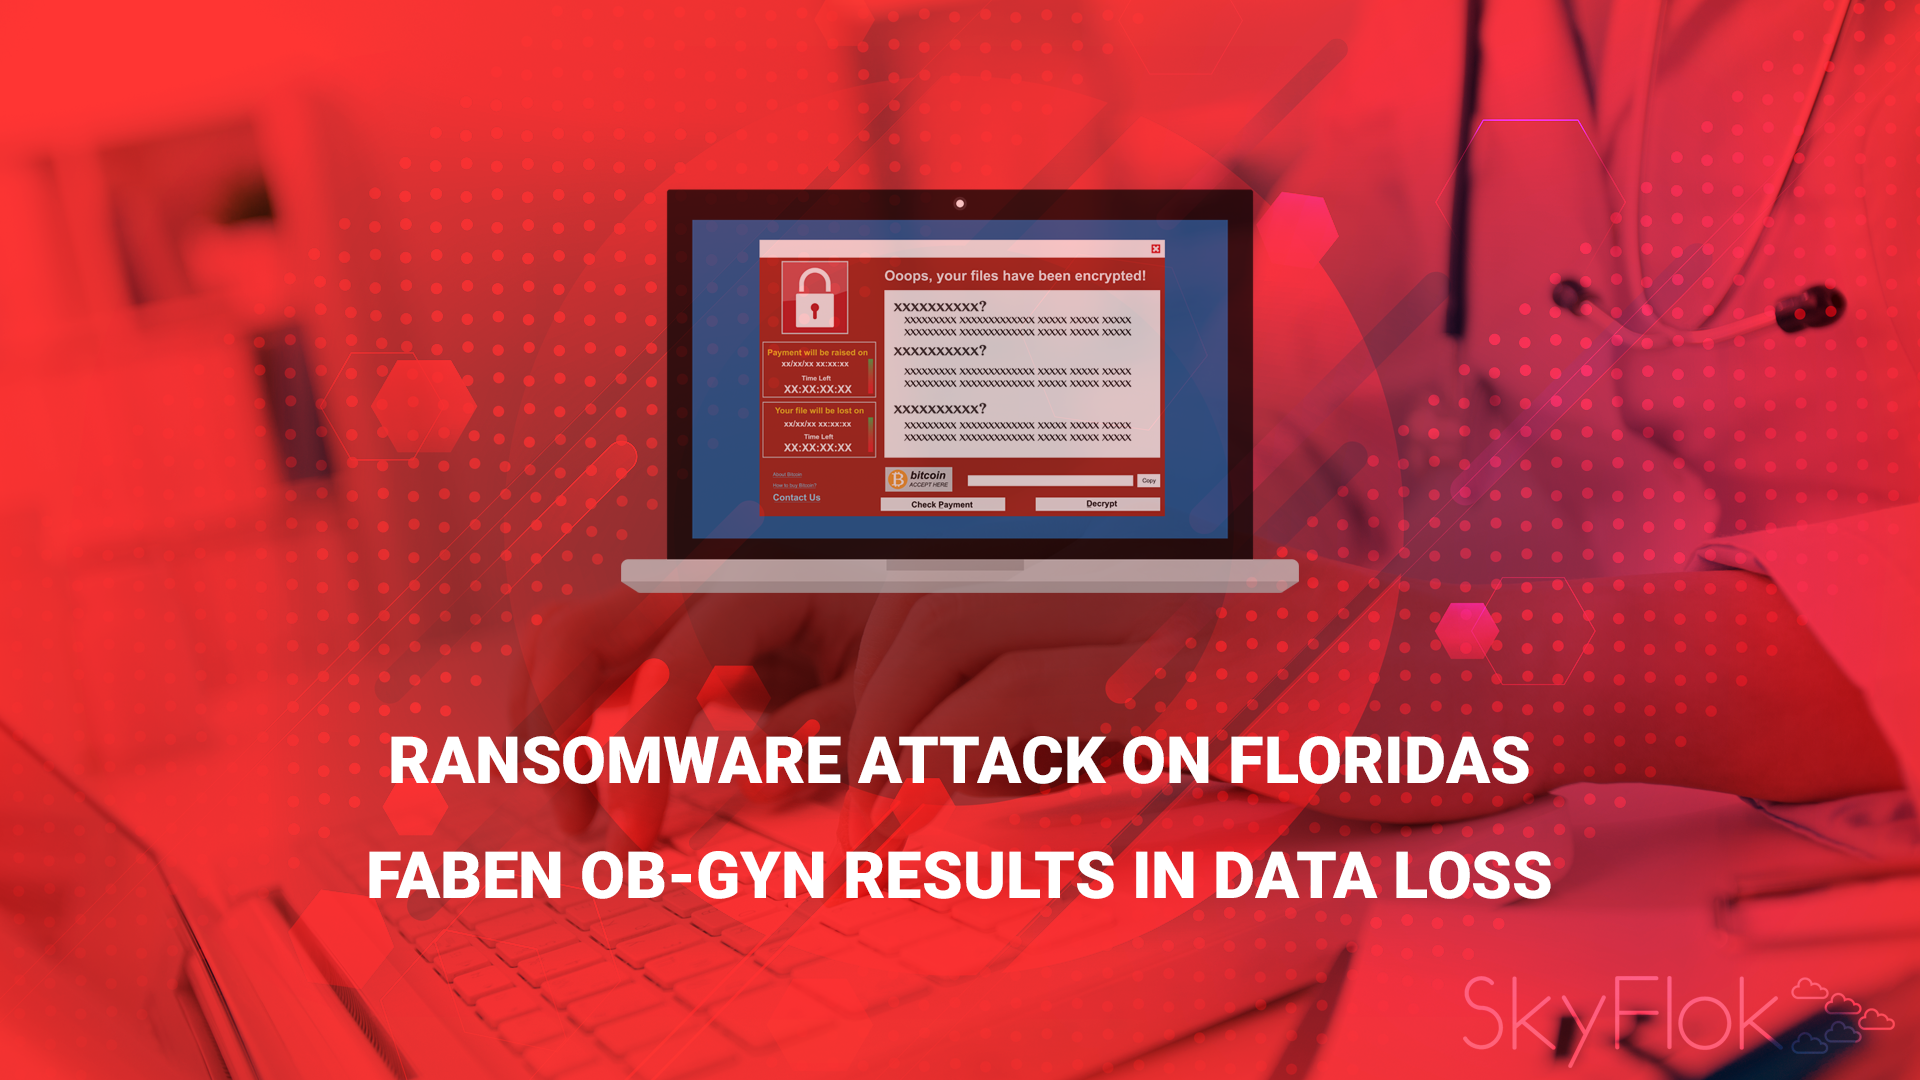 Ransomware Attack on Florida’s FABEN OB-GYN Results in Data Loss